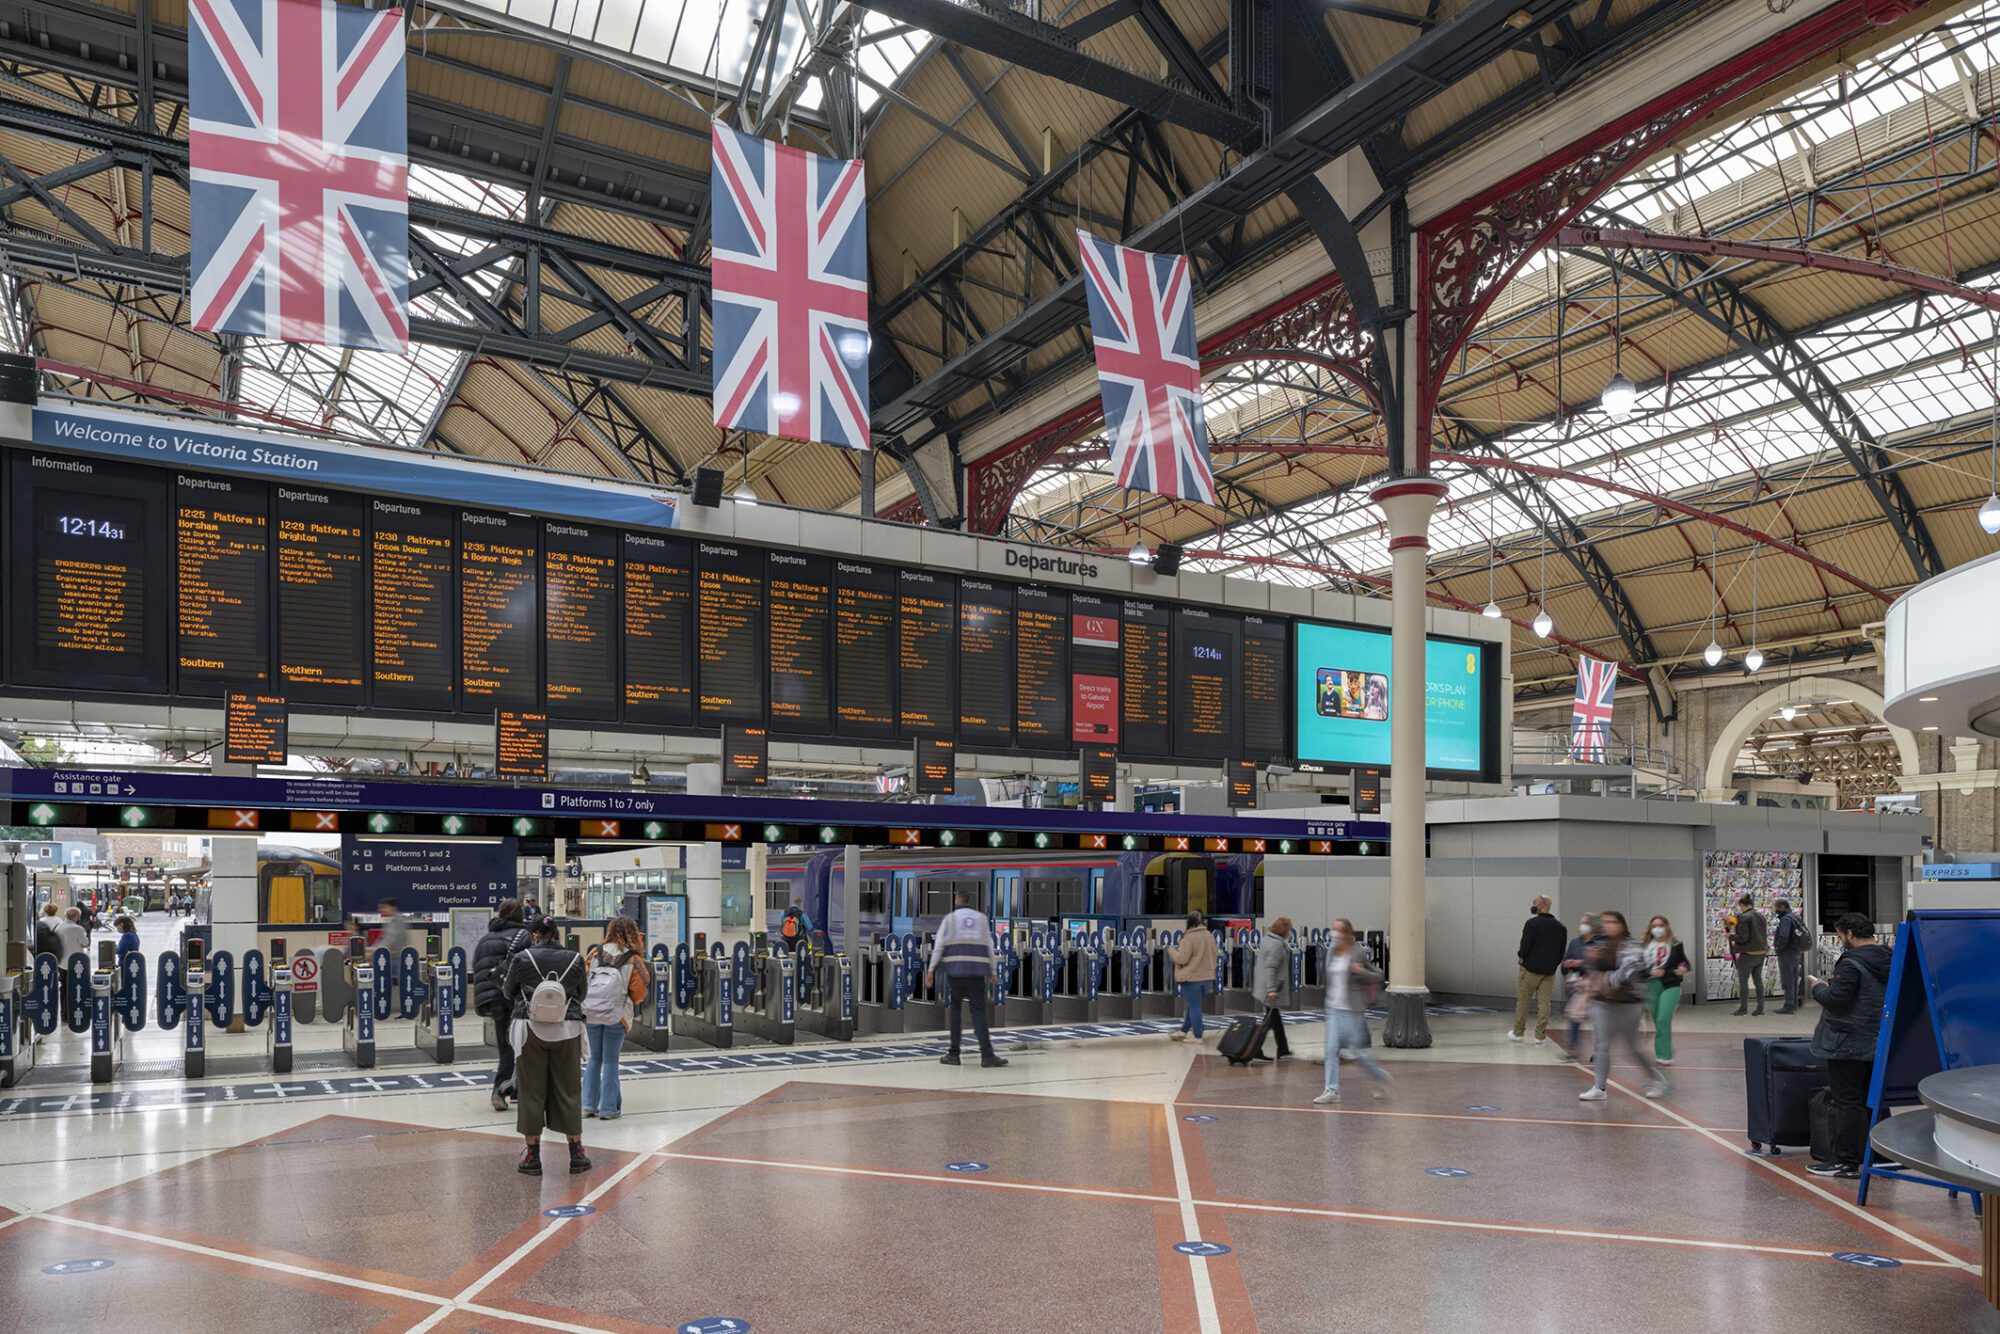 Victoria railway station to receive £30m investment – South London News